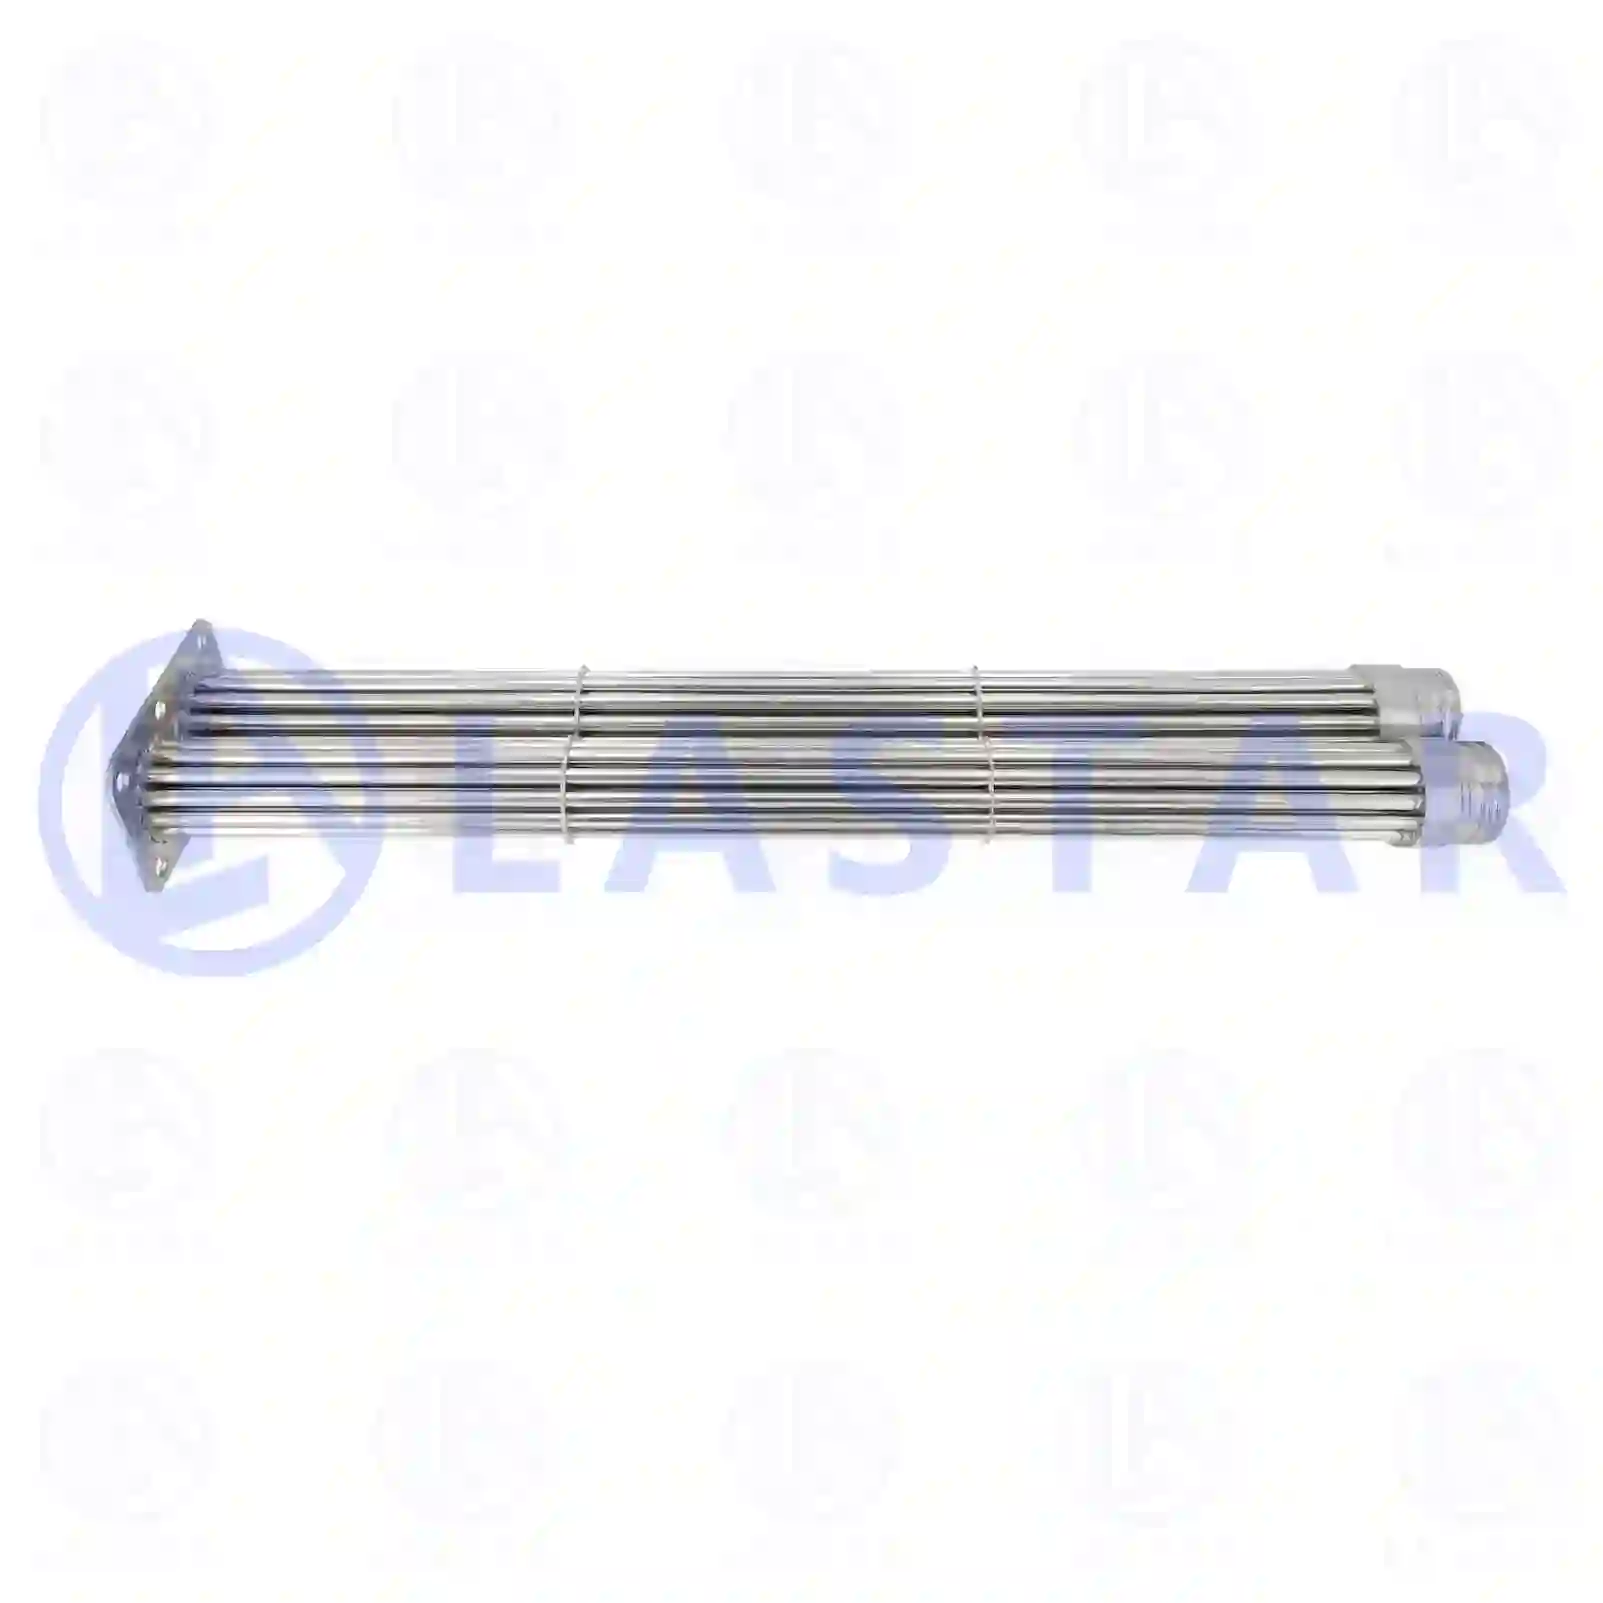 Radiator, exhaust gas recirculation, 77704542, 51081007048S, 51081007060S, 51081007063S ||  77704542 Lastar Spare Part | Truck Spare Parts, Auotomotive Spare Parts Radiator, exhaust gas recirculation, 77704542, 51081007048S, 51081007060S, 51081007063S ||  77704542 Lastar Spare Part | Truck Spare Parts, Auotomotive Spare Parts